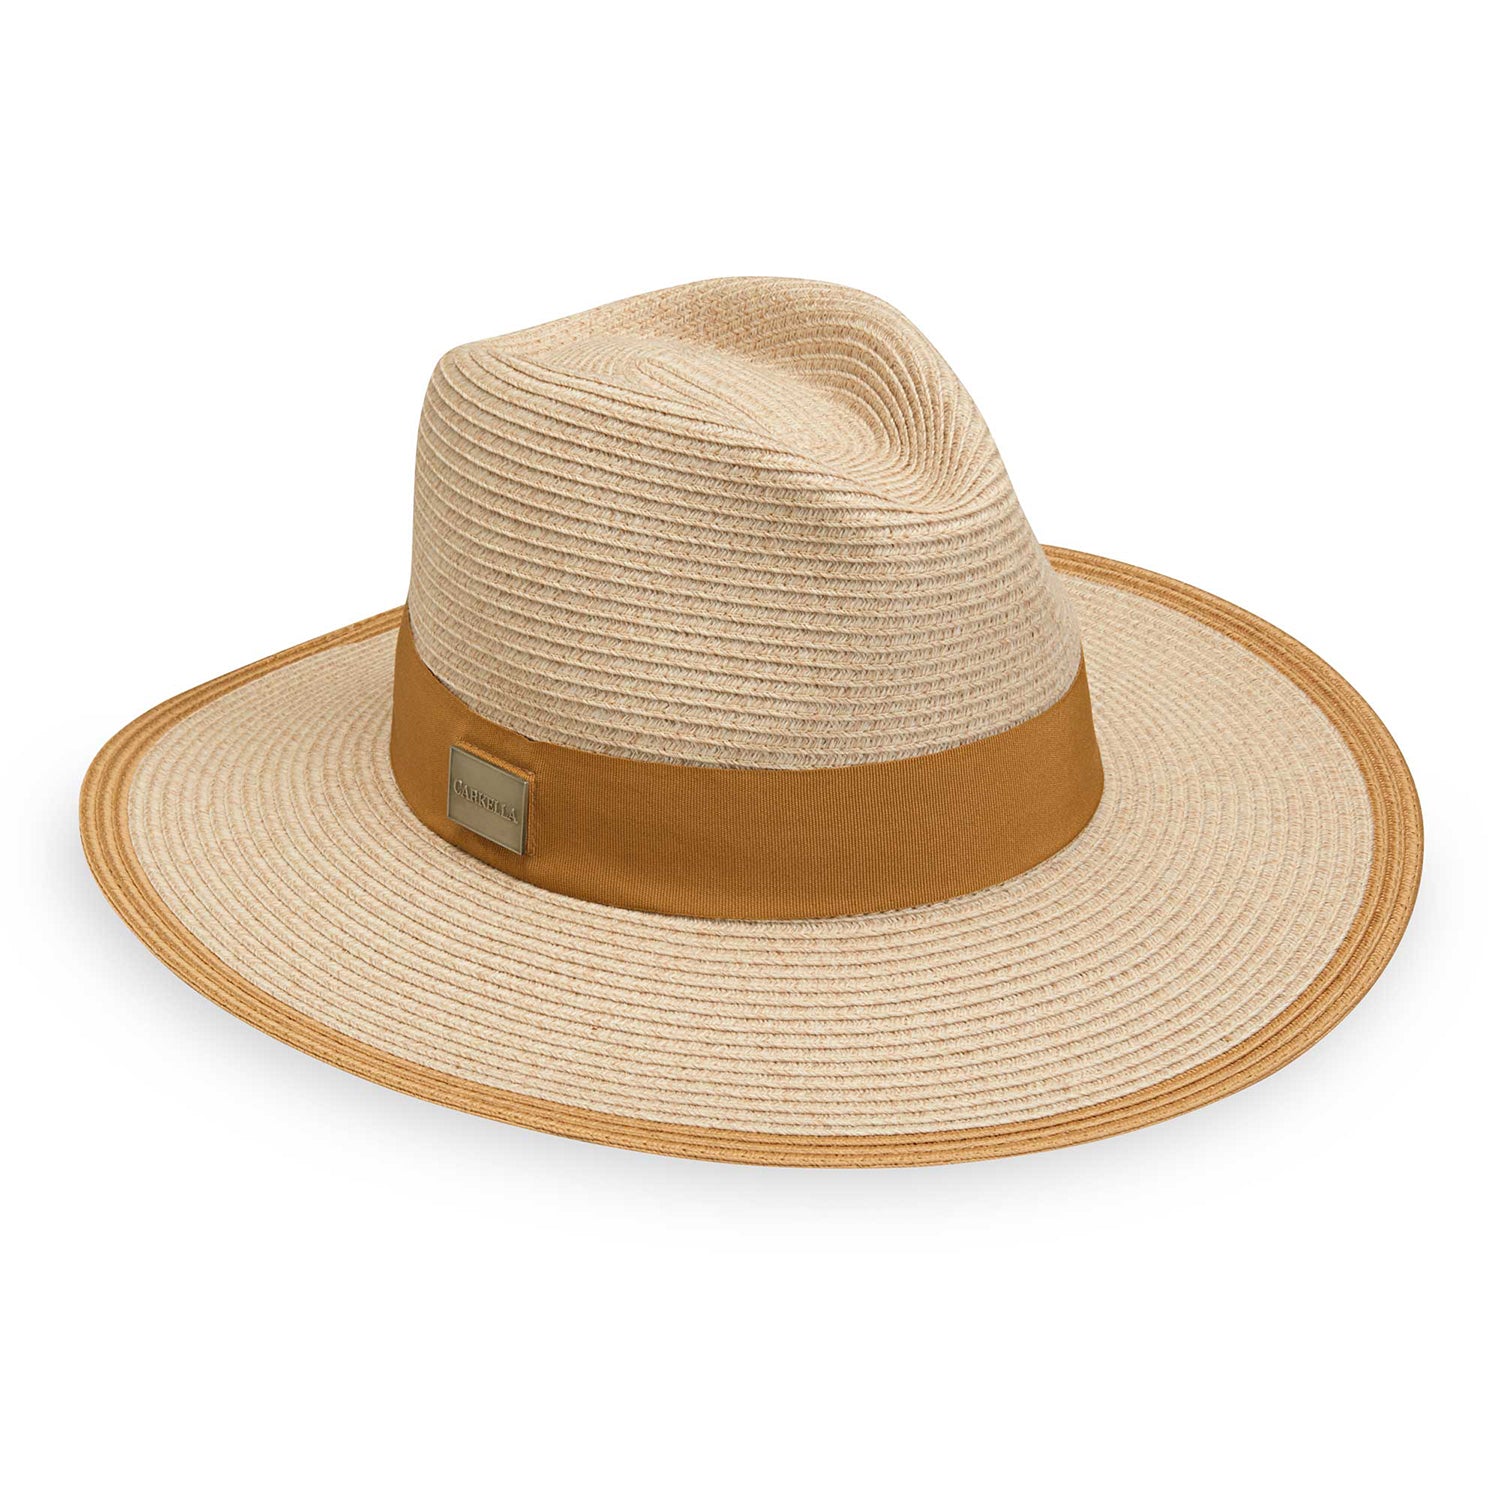 Featuring The Lauren fedora style sun hat with a big wide brim to provide UPF 50 sun protection